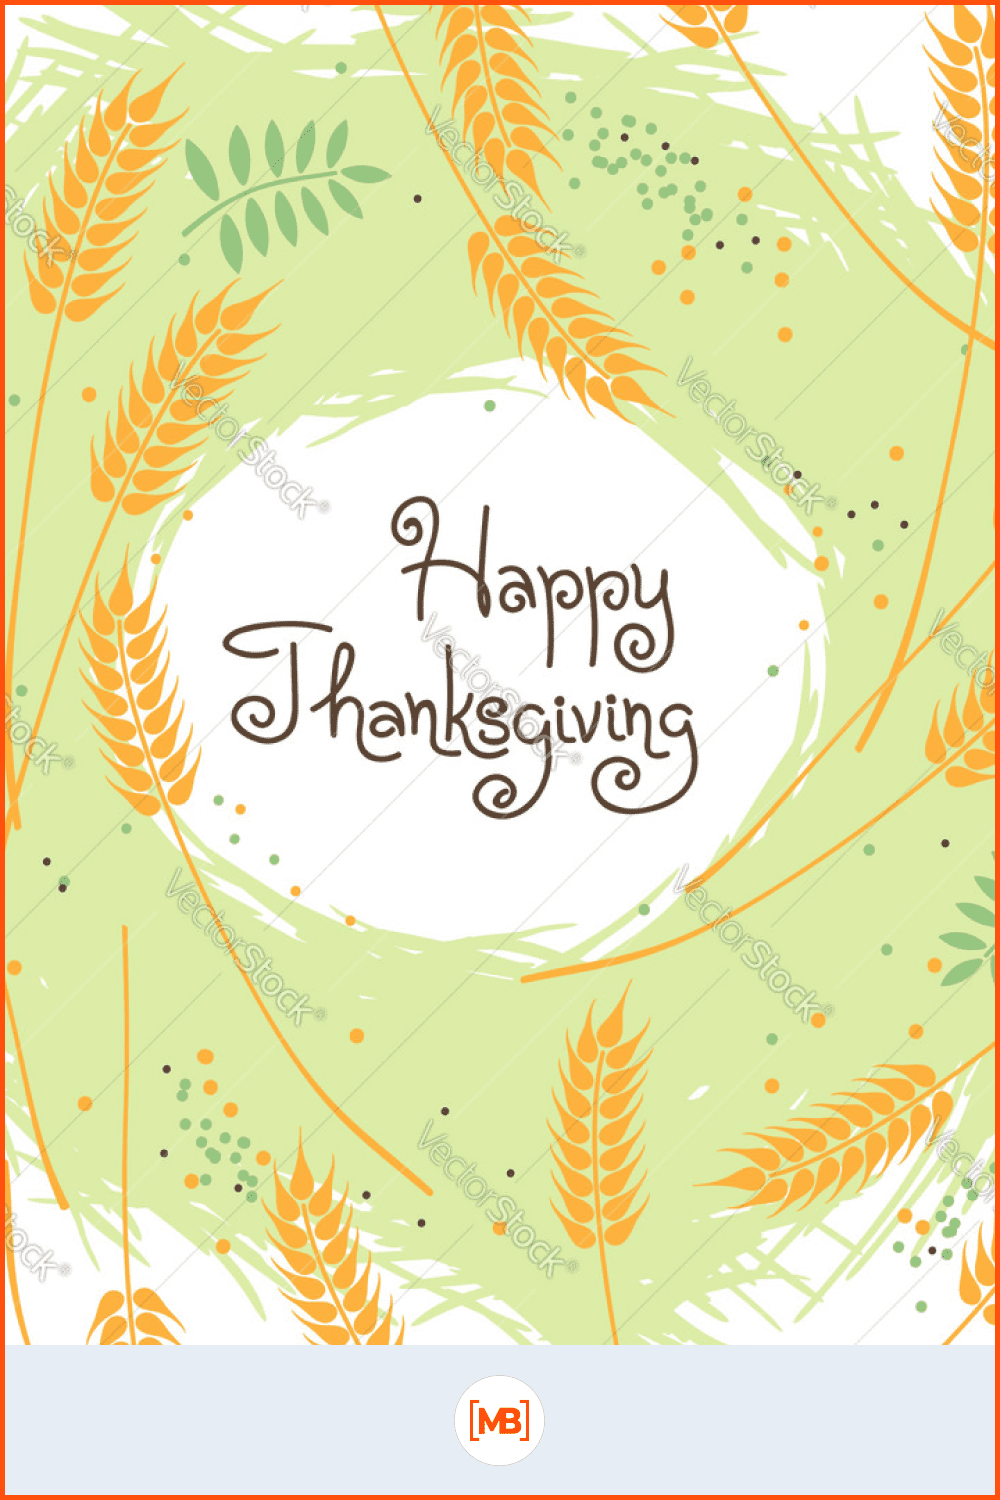 Happy Thanksgiving Fall Background with Wheat Ears vector image.